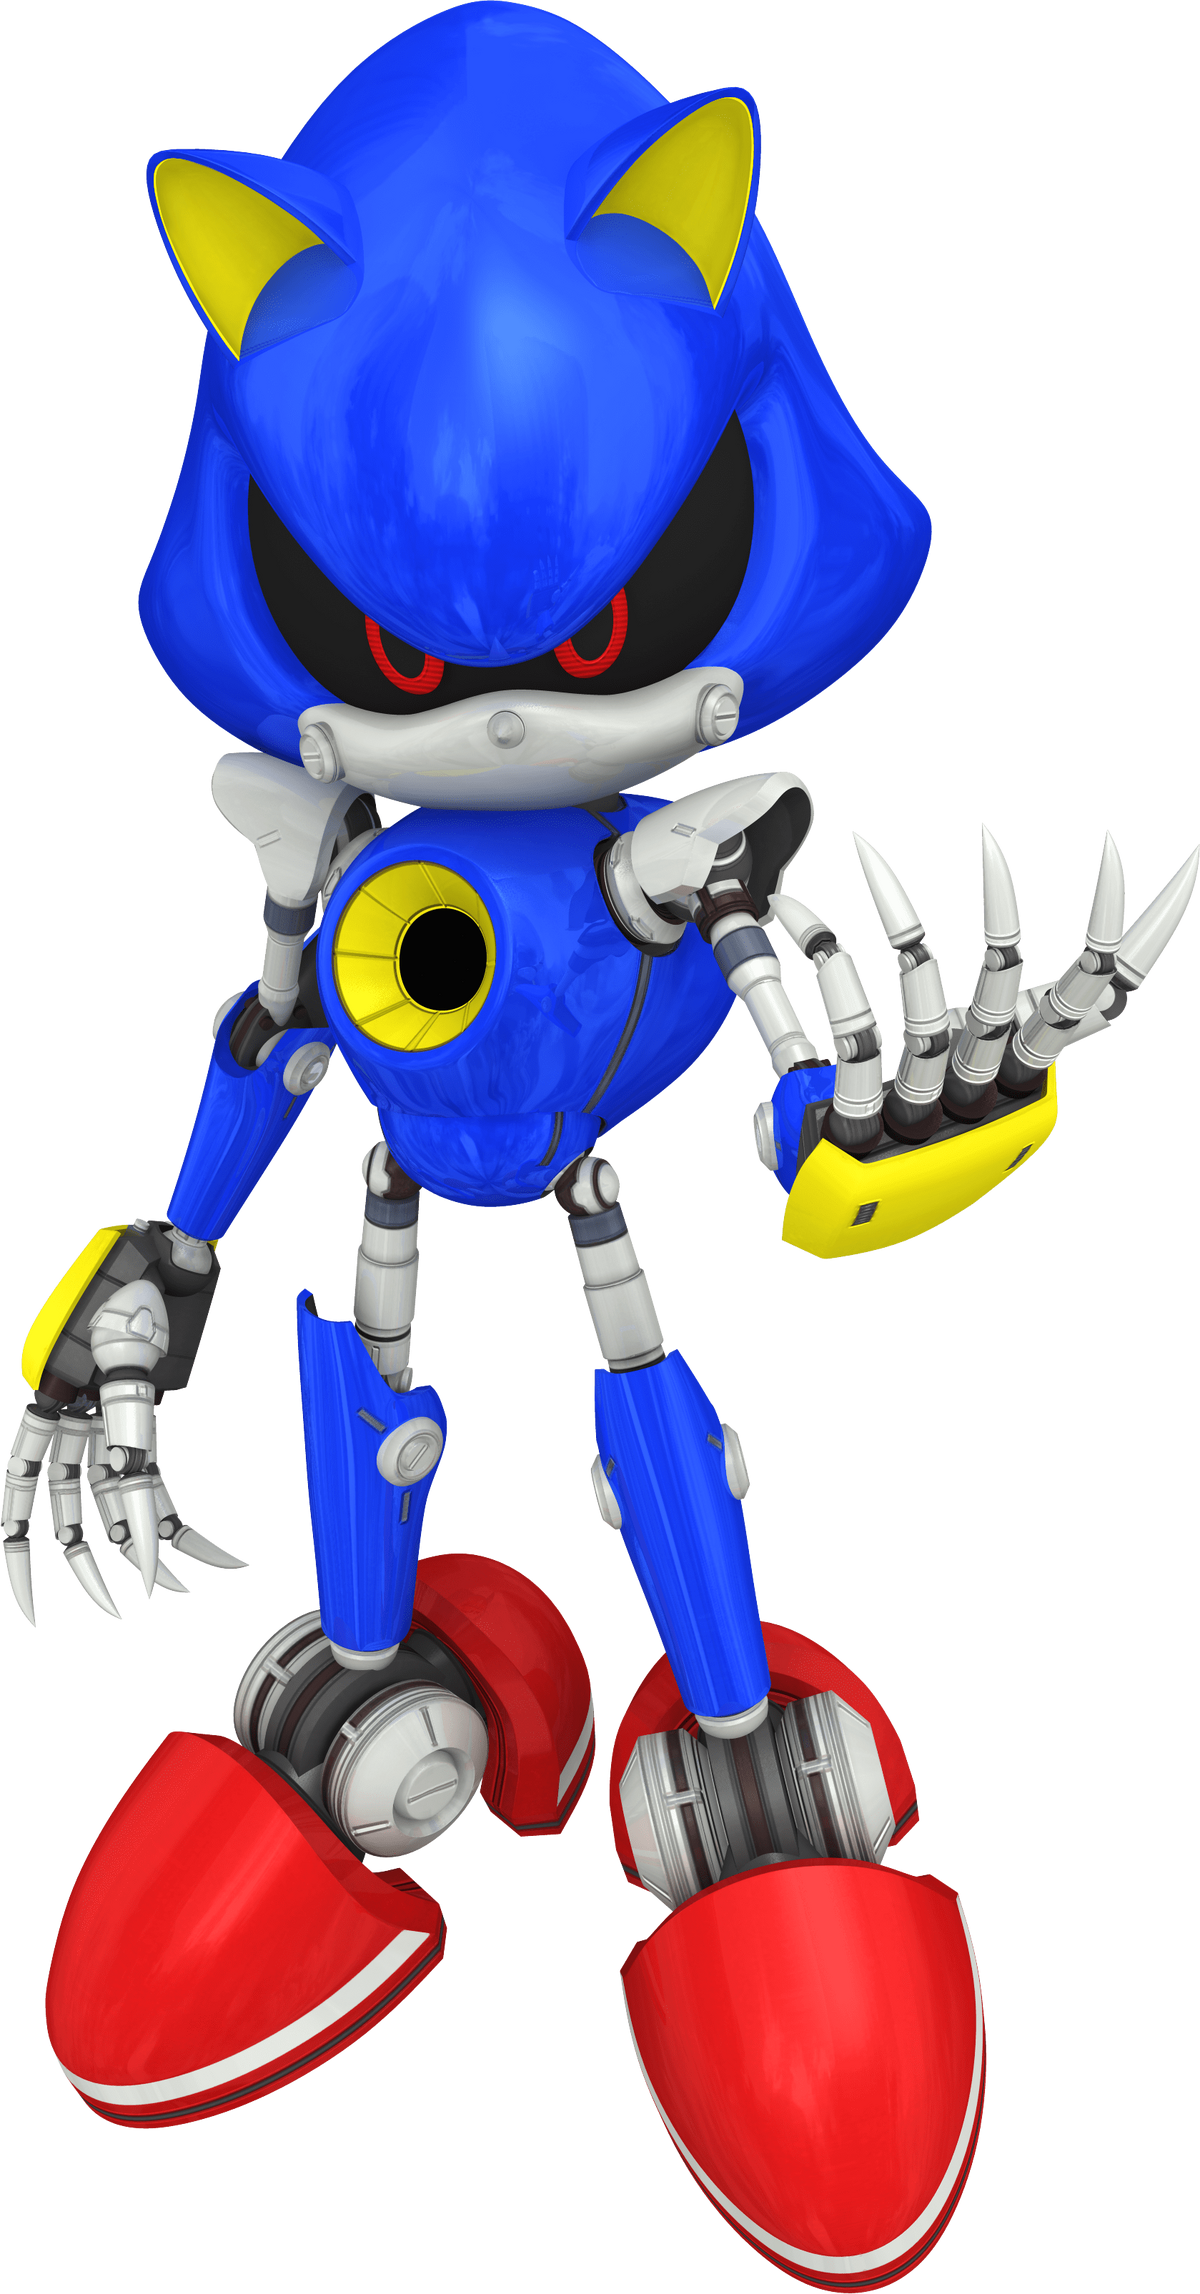 Sonic The Hedgehog: 5 Actors Who Could Voice Metal Sonic